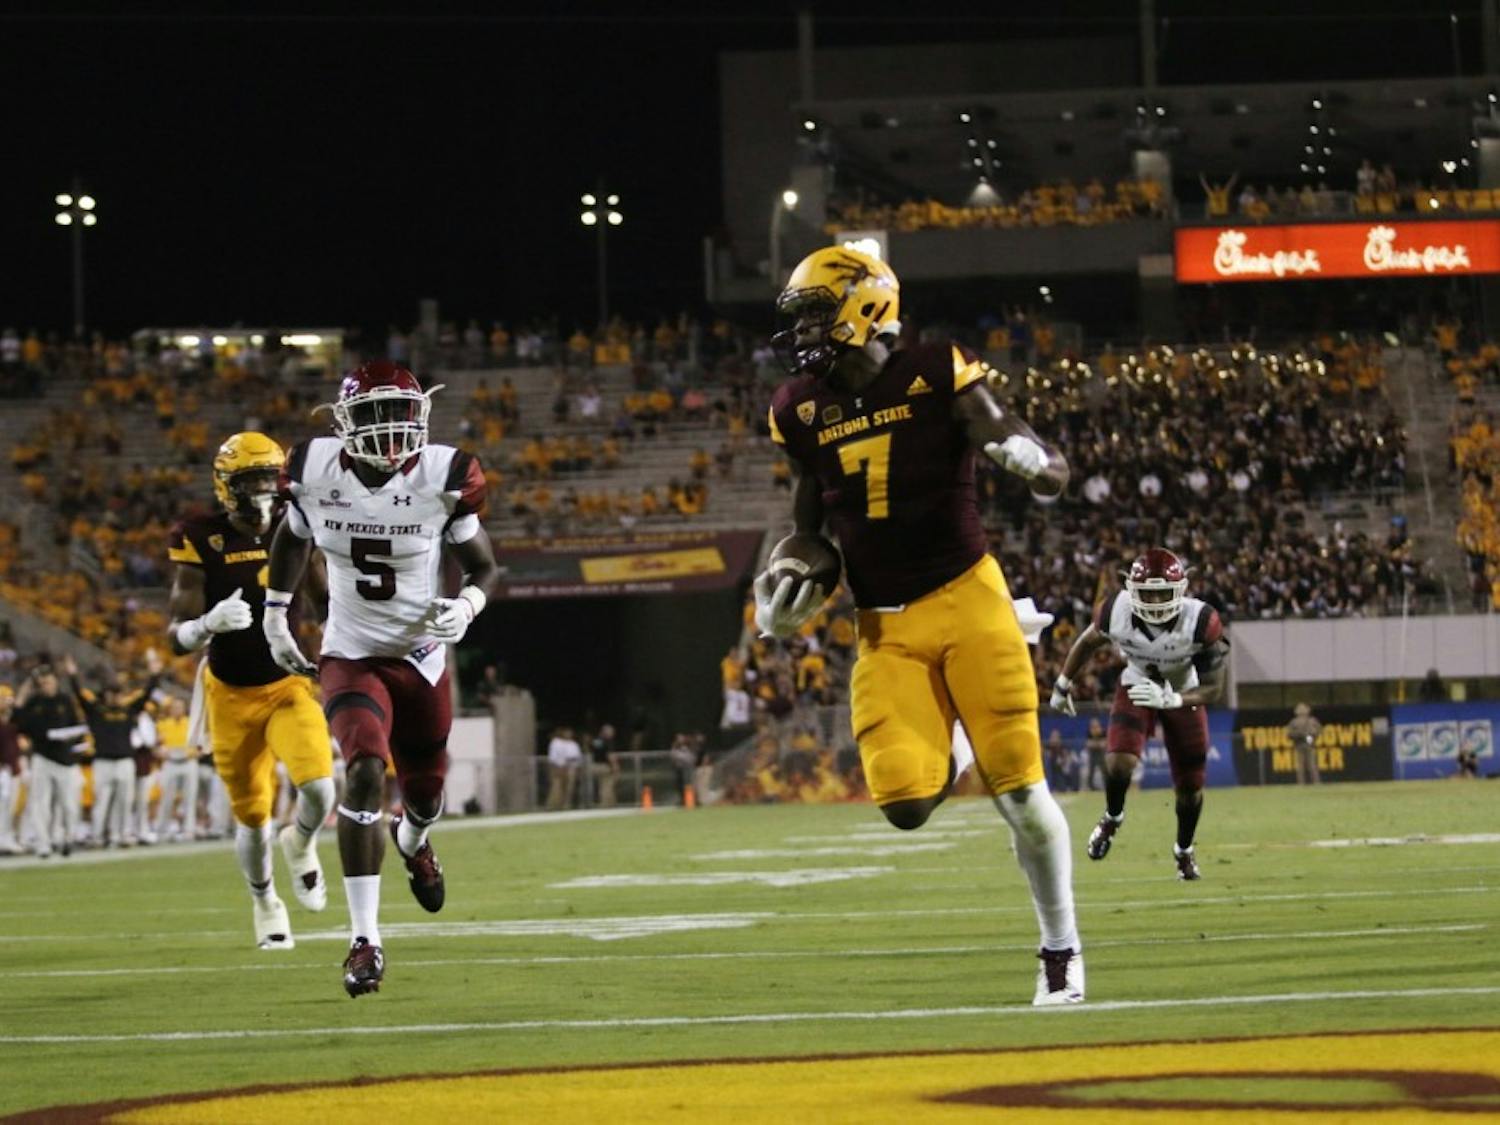 Gallery: Recap of the Sun Devils First Football Game this Season